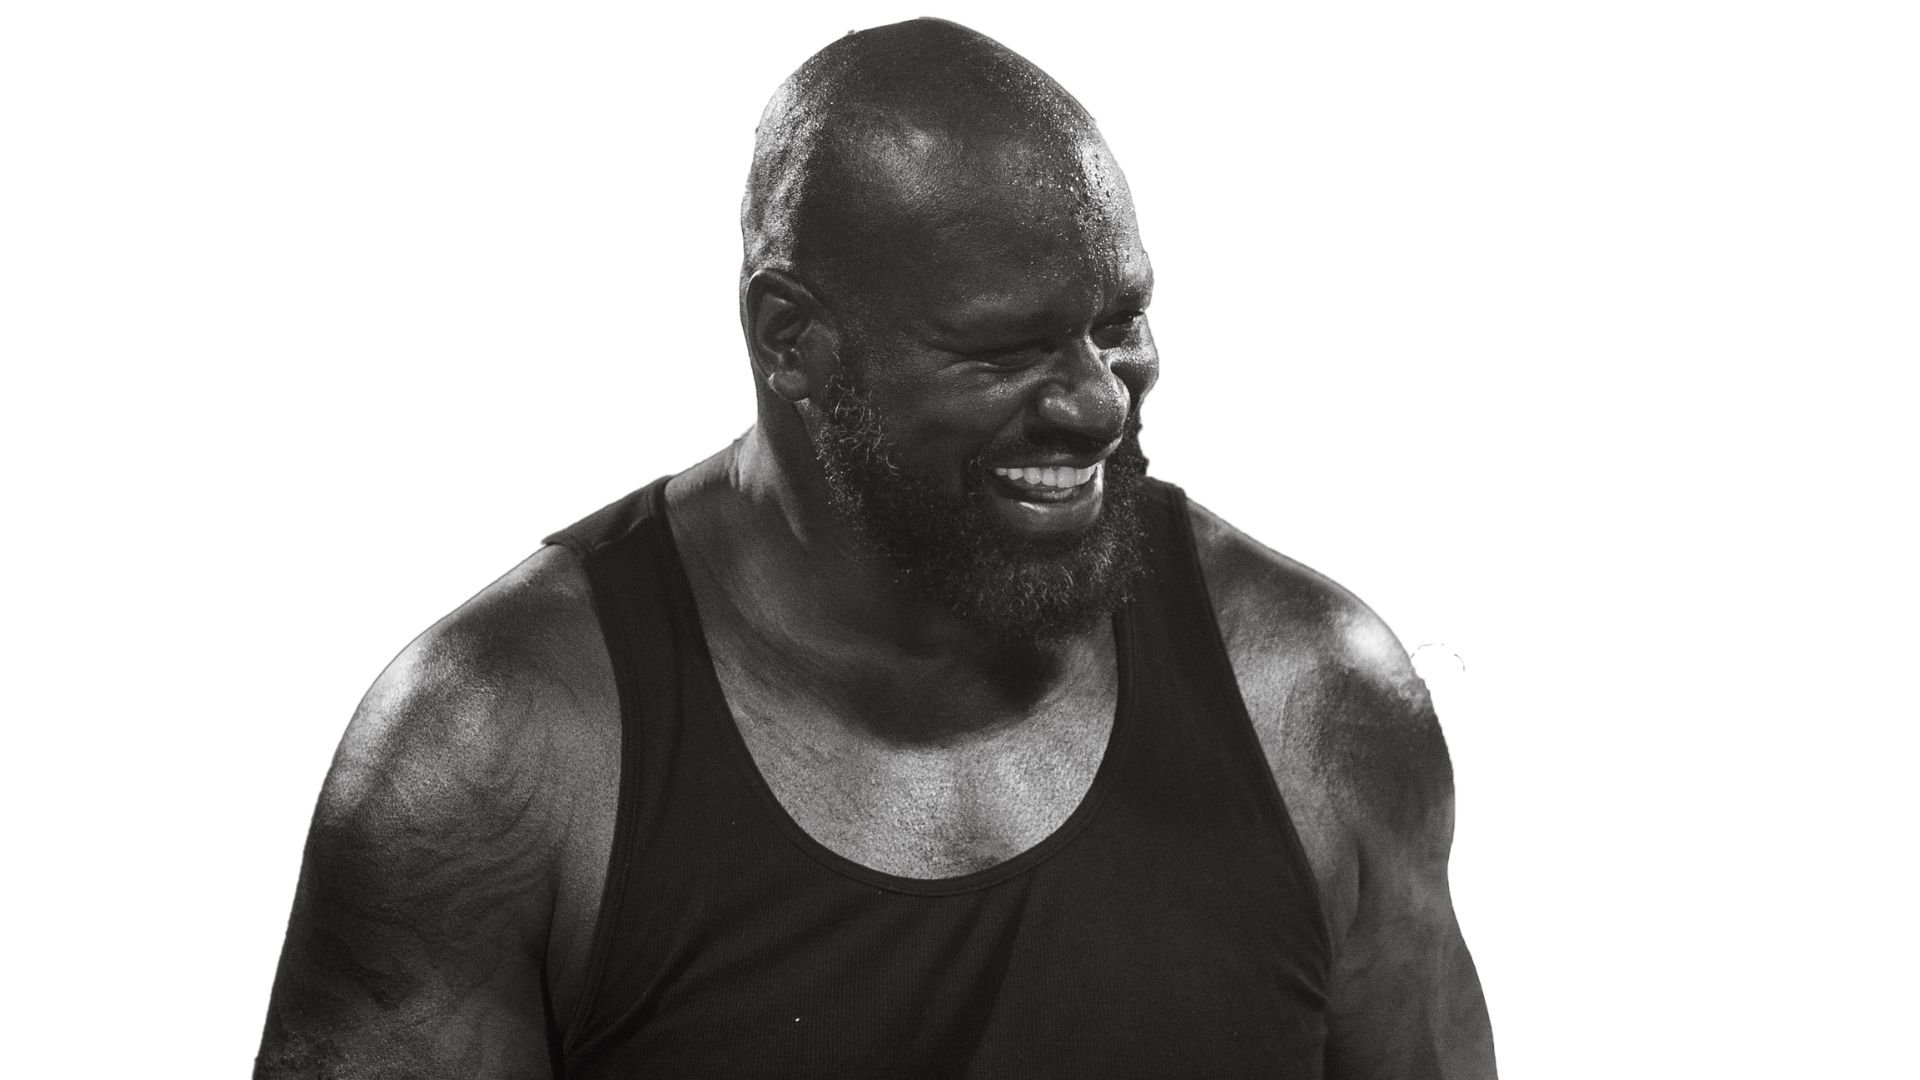 Shaquille O’Neal set to host first ever major scale festival with Shaq’s Bass All Stars Festival this weekend